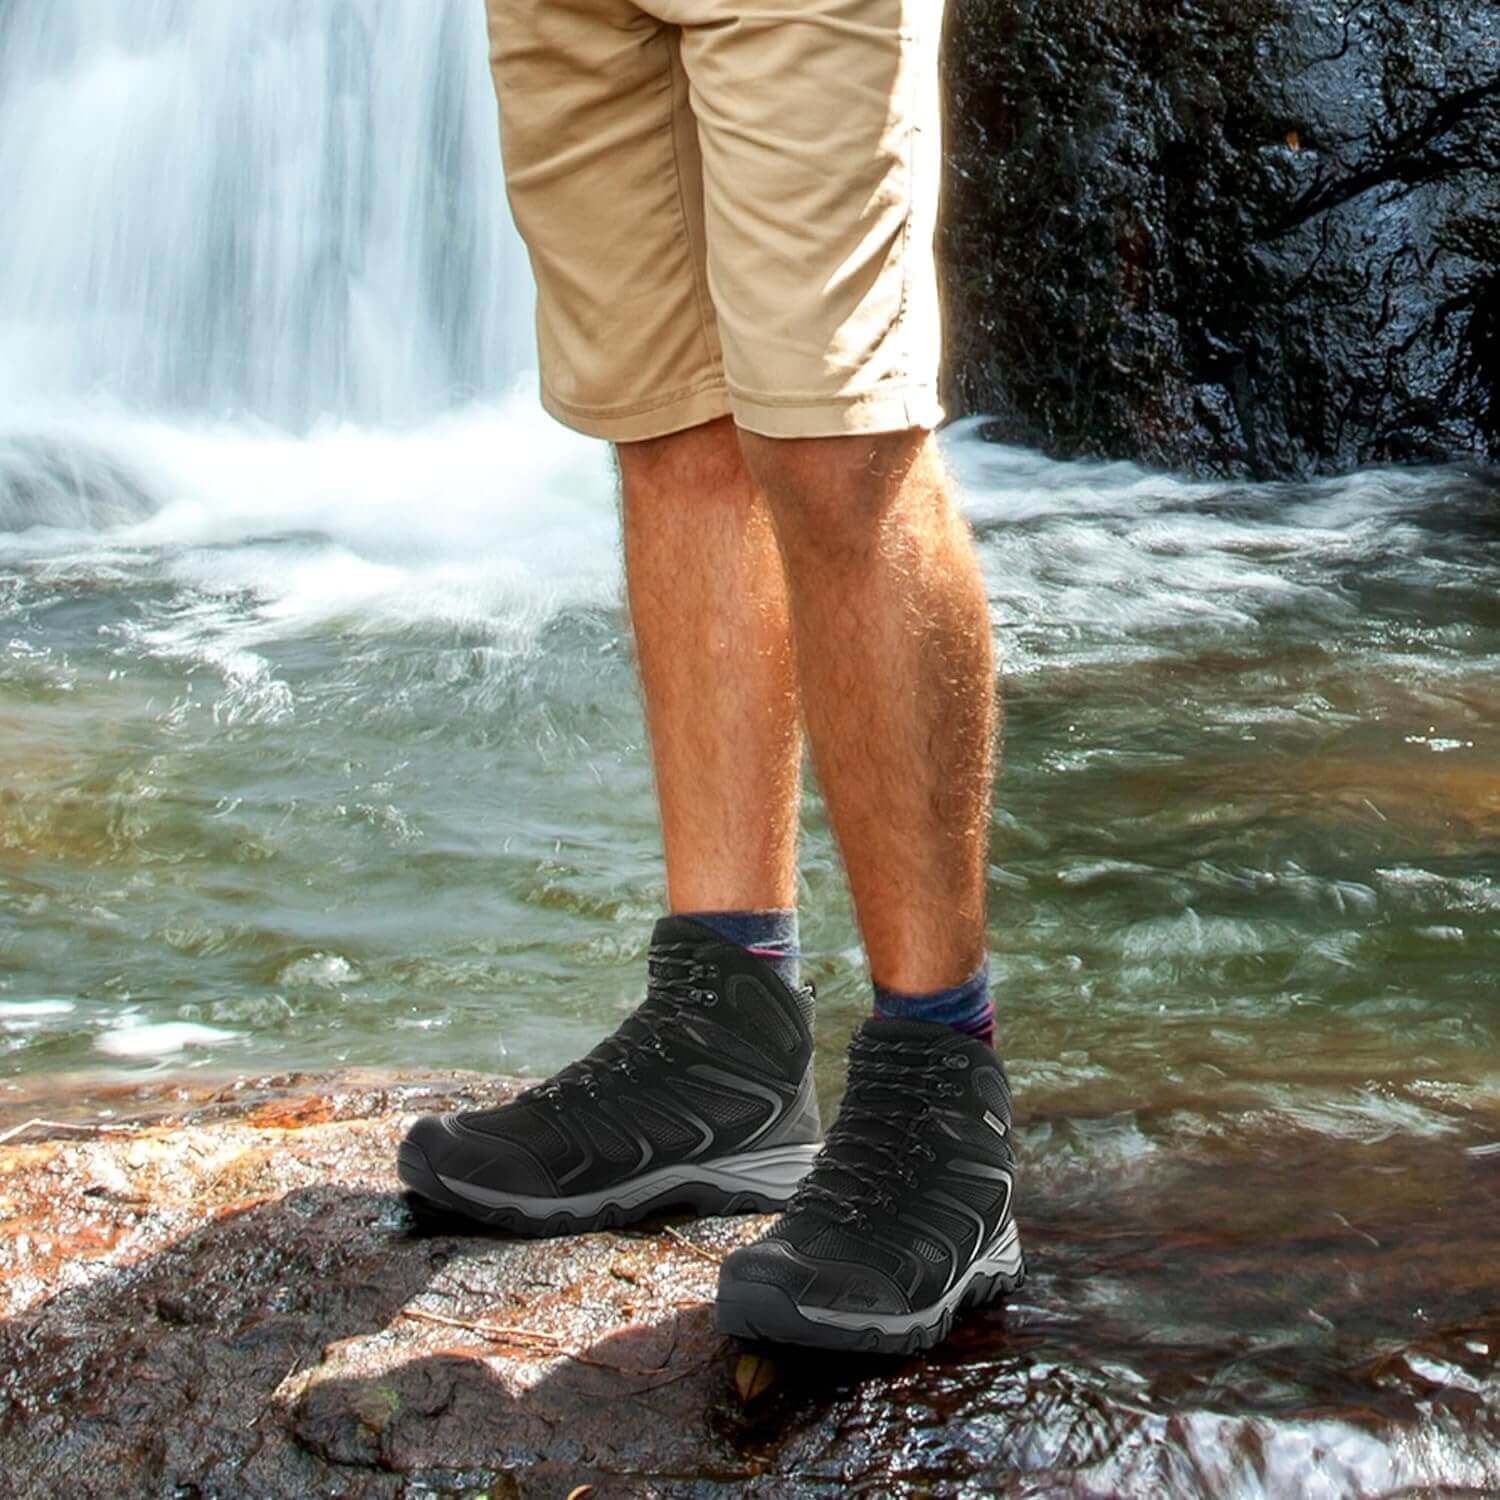 Shop The Latest >NORTIV 8 Men's Ankle High Waterproof Hiking Boots > *Only $92.39*> From The Top Brand > *NORTIV 8l* > Shop Now and Get Free Shipping On Orders Over $45.00 >*Shop Earth Foot*